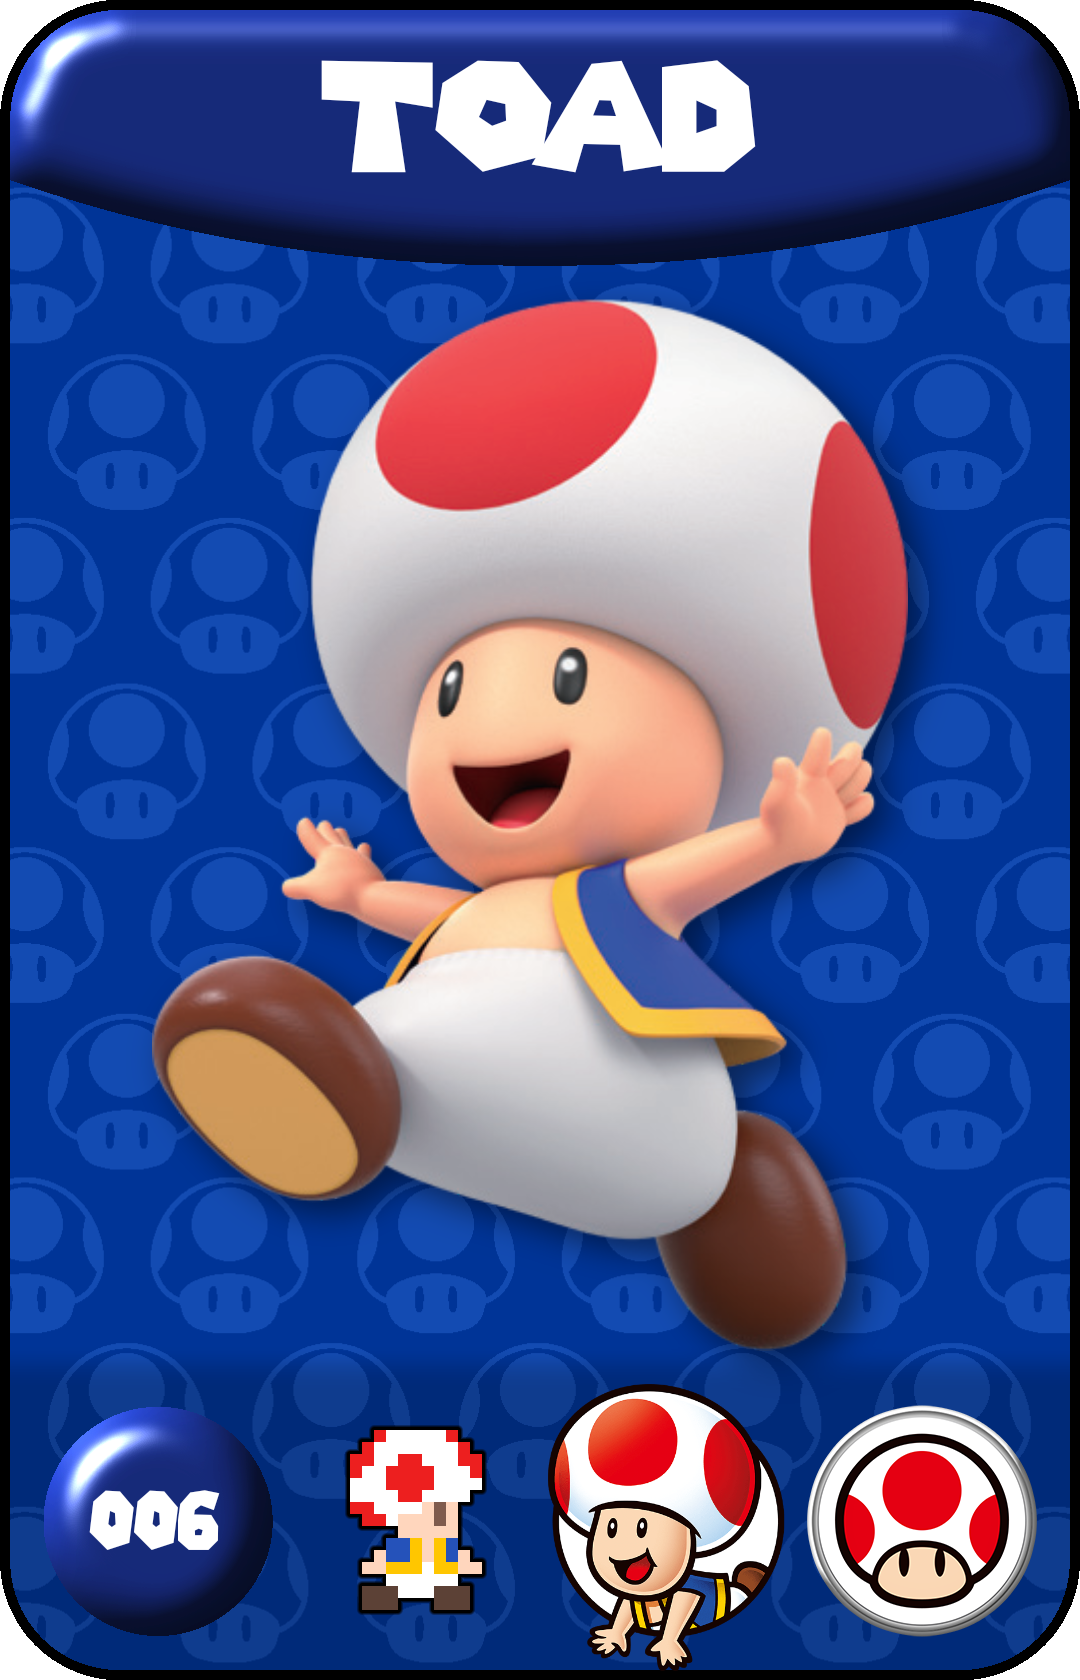 006 - Toad (1).png